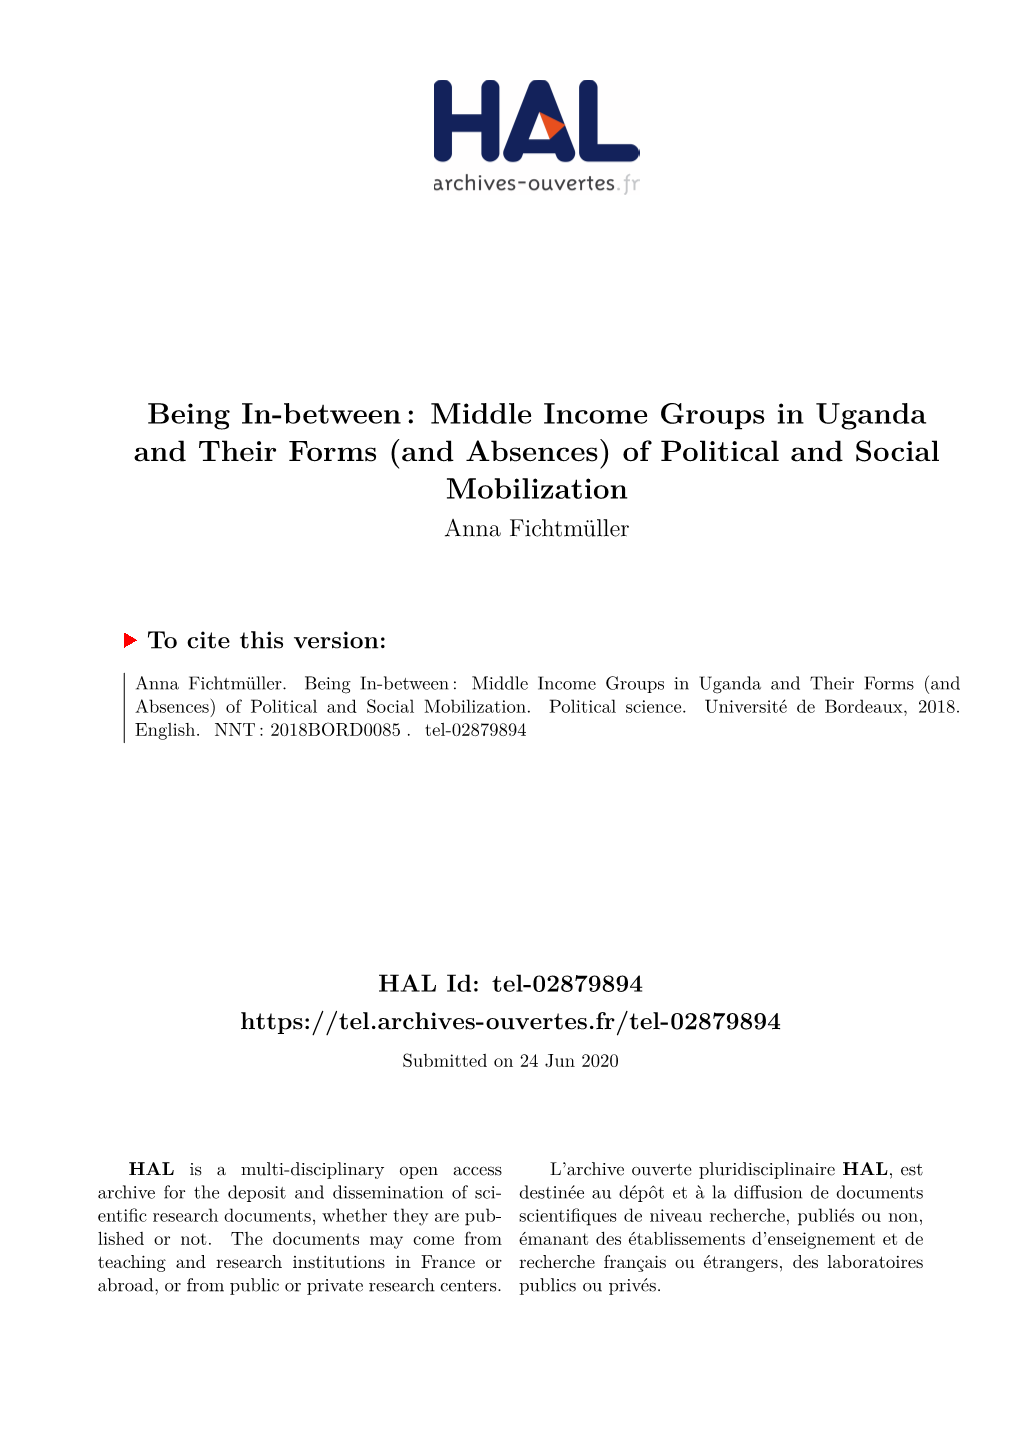 Being In-Between: Middle Income Groups in Uganda and Their Forms